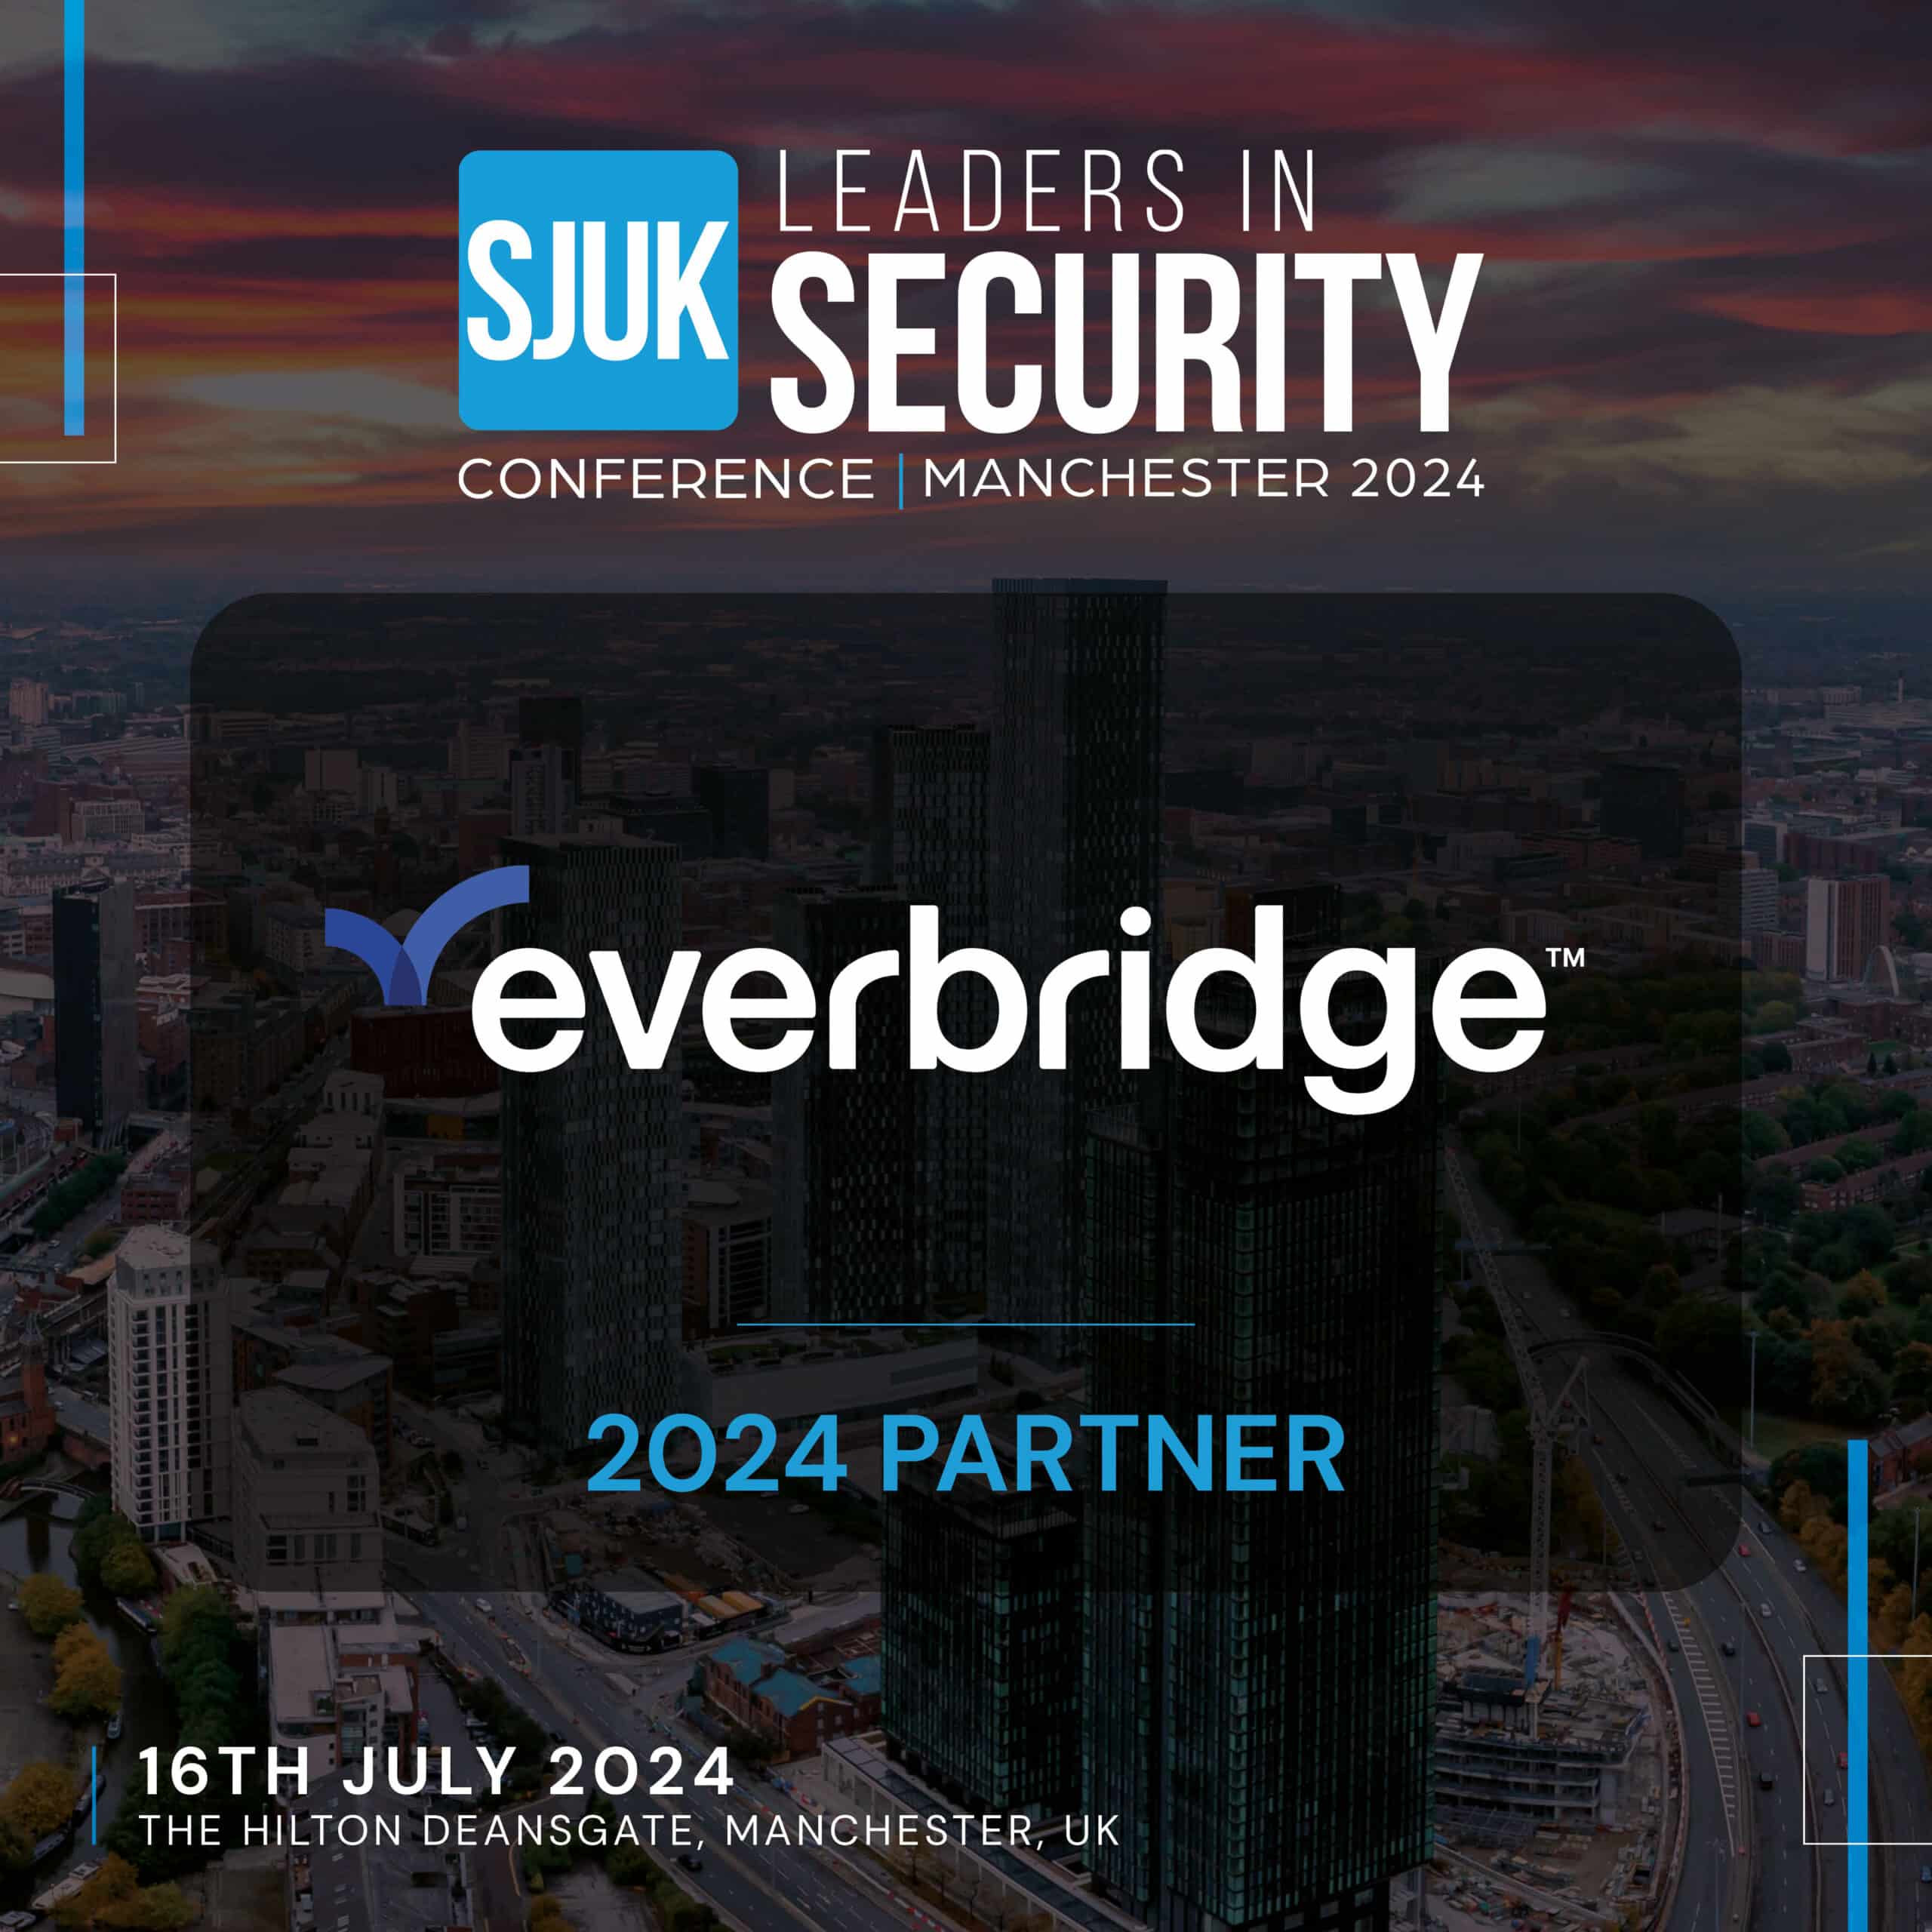 Everbridge, a global leader for integrated critical event management solutions, has confirmed its support for the SJUK Leaders in Security Conference taking place at the Hilton Deansgate on Tuesday 16 July.